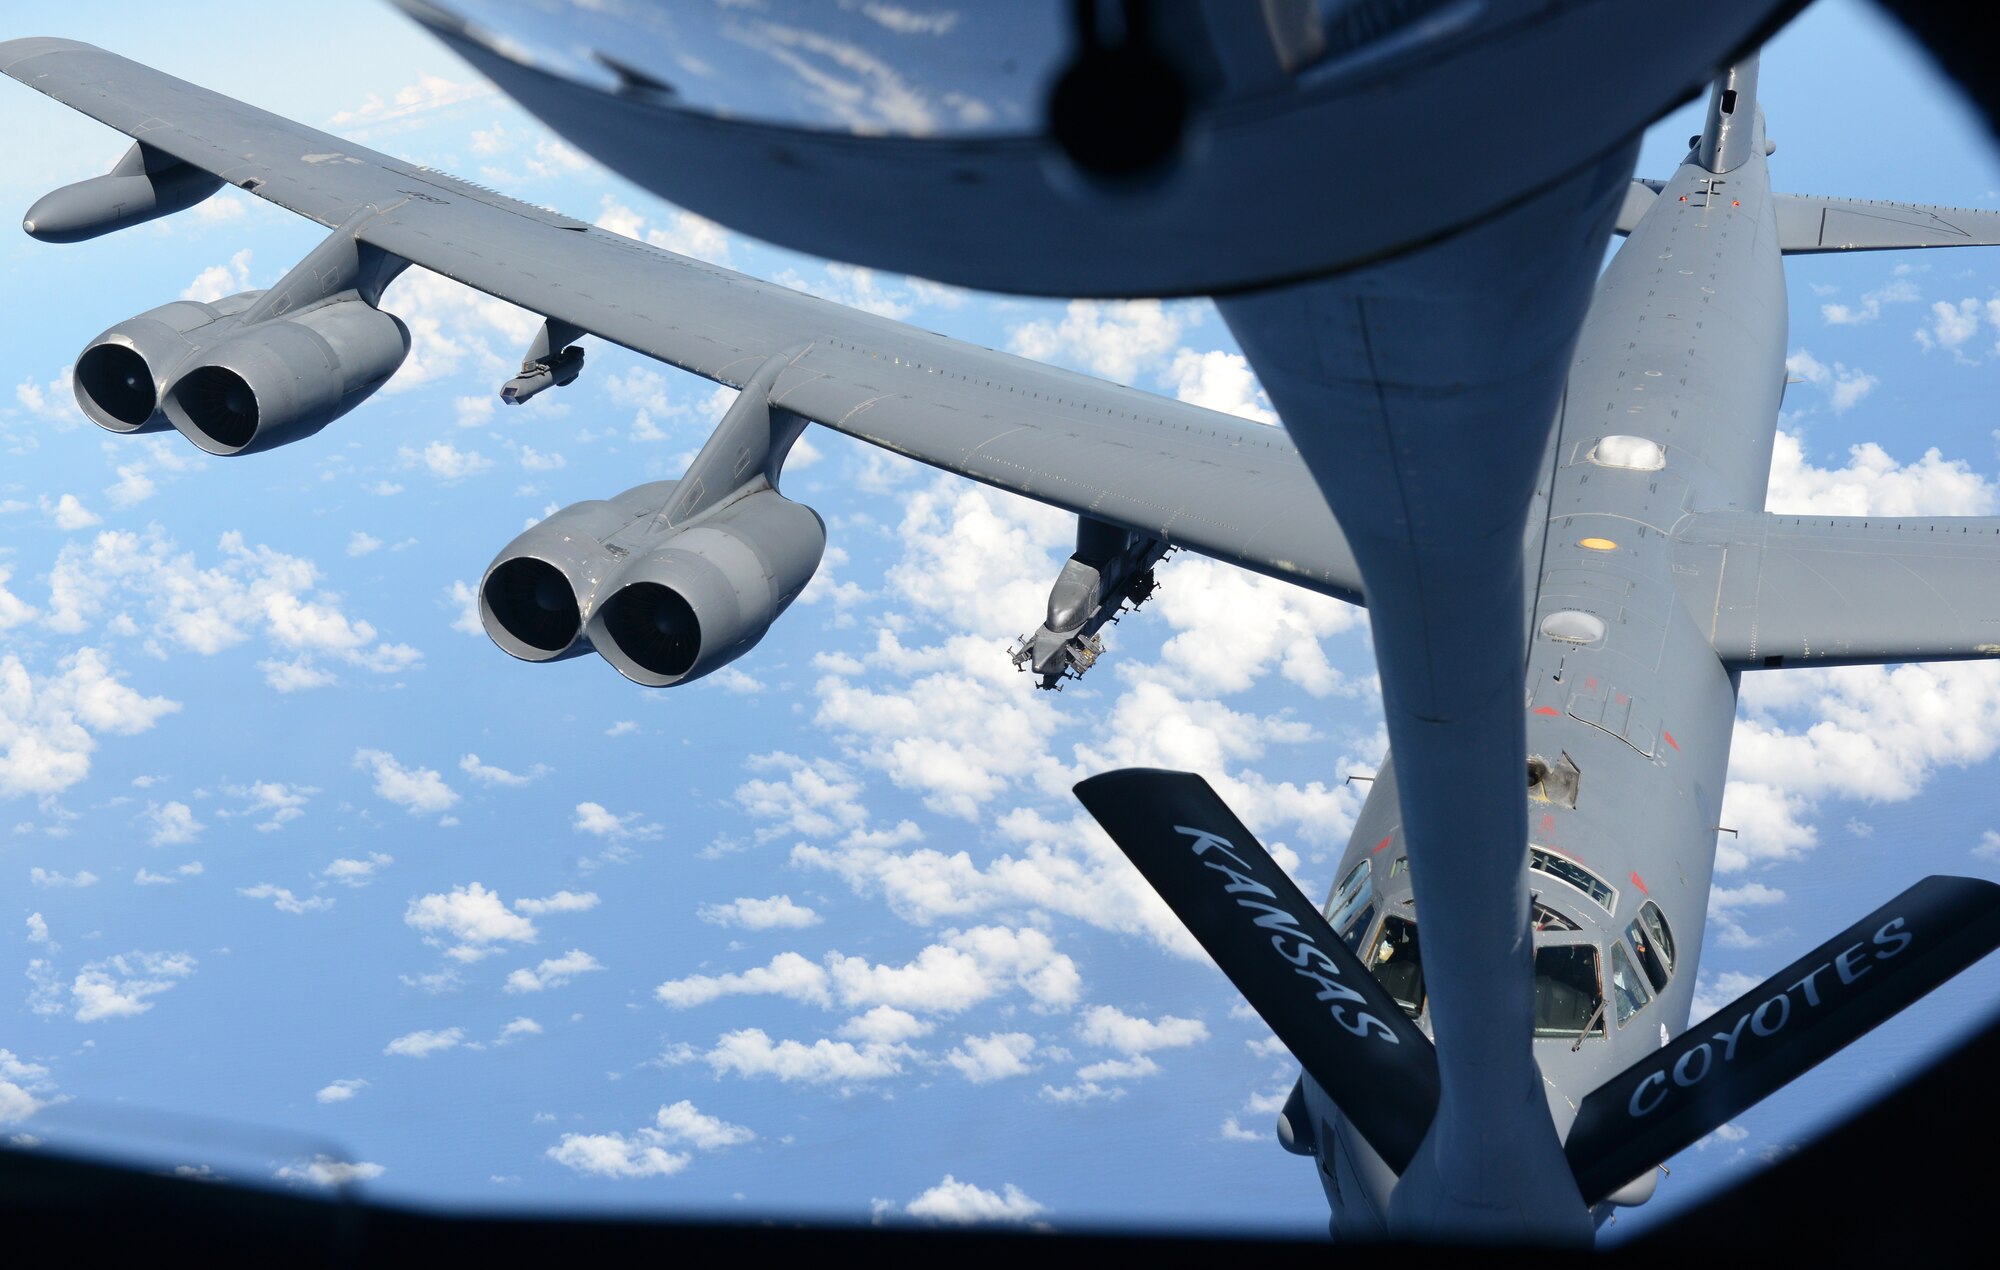 A B-52 Stratofortress connects to a KC-135 Stratotanker during an aerial refueling exercise Nov. 6, 2015, near Andersen Air Force Base, Guam. The B-52 crews are a part of the U.S. Pacific Command’s continuous bomber presence and support ongoing operations in the Indo- Asia Pacific region. (U.S. Air Force photo by Airman 1st Class Arielle Vasquez/Released)